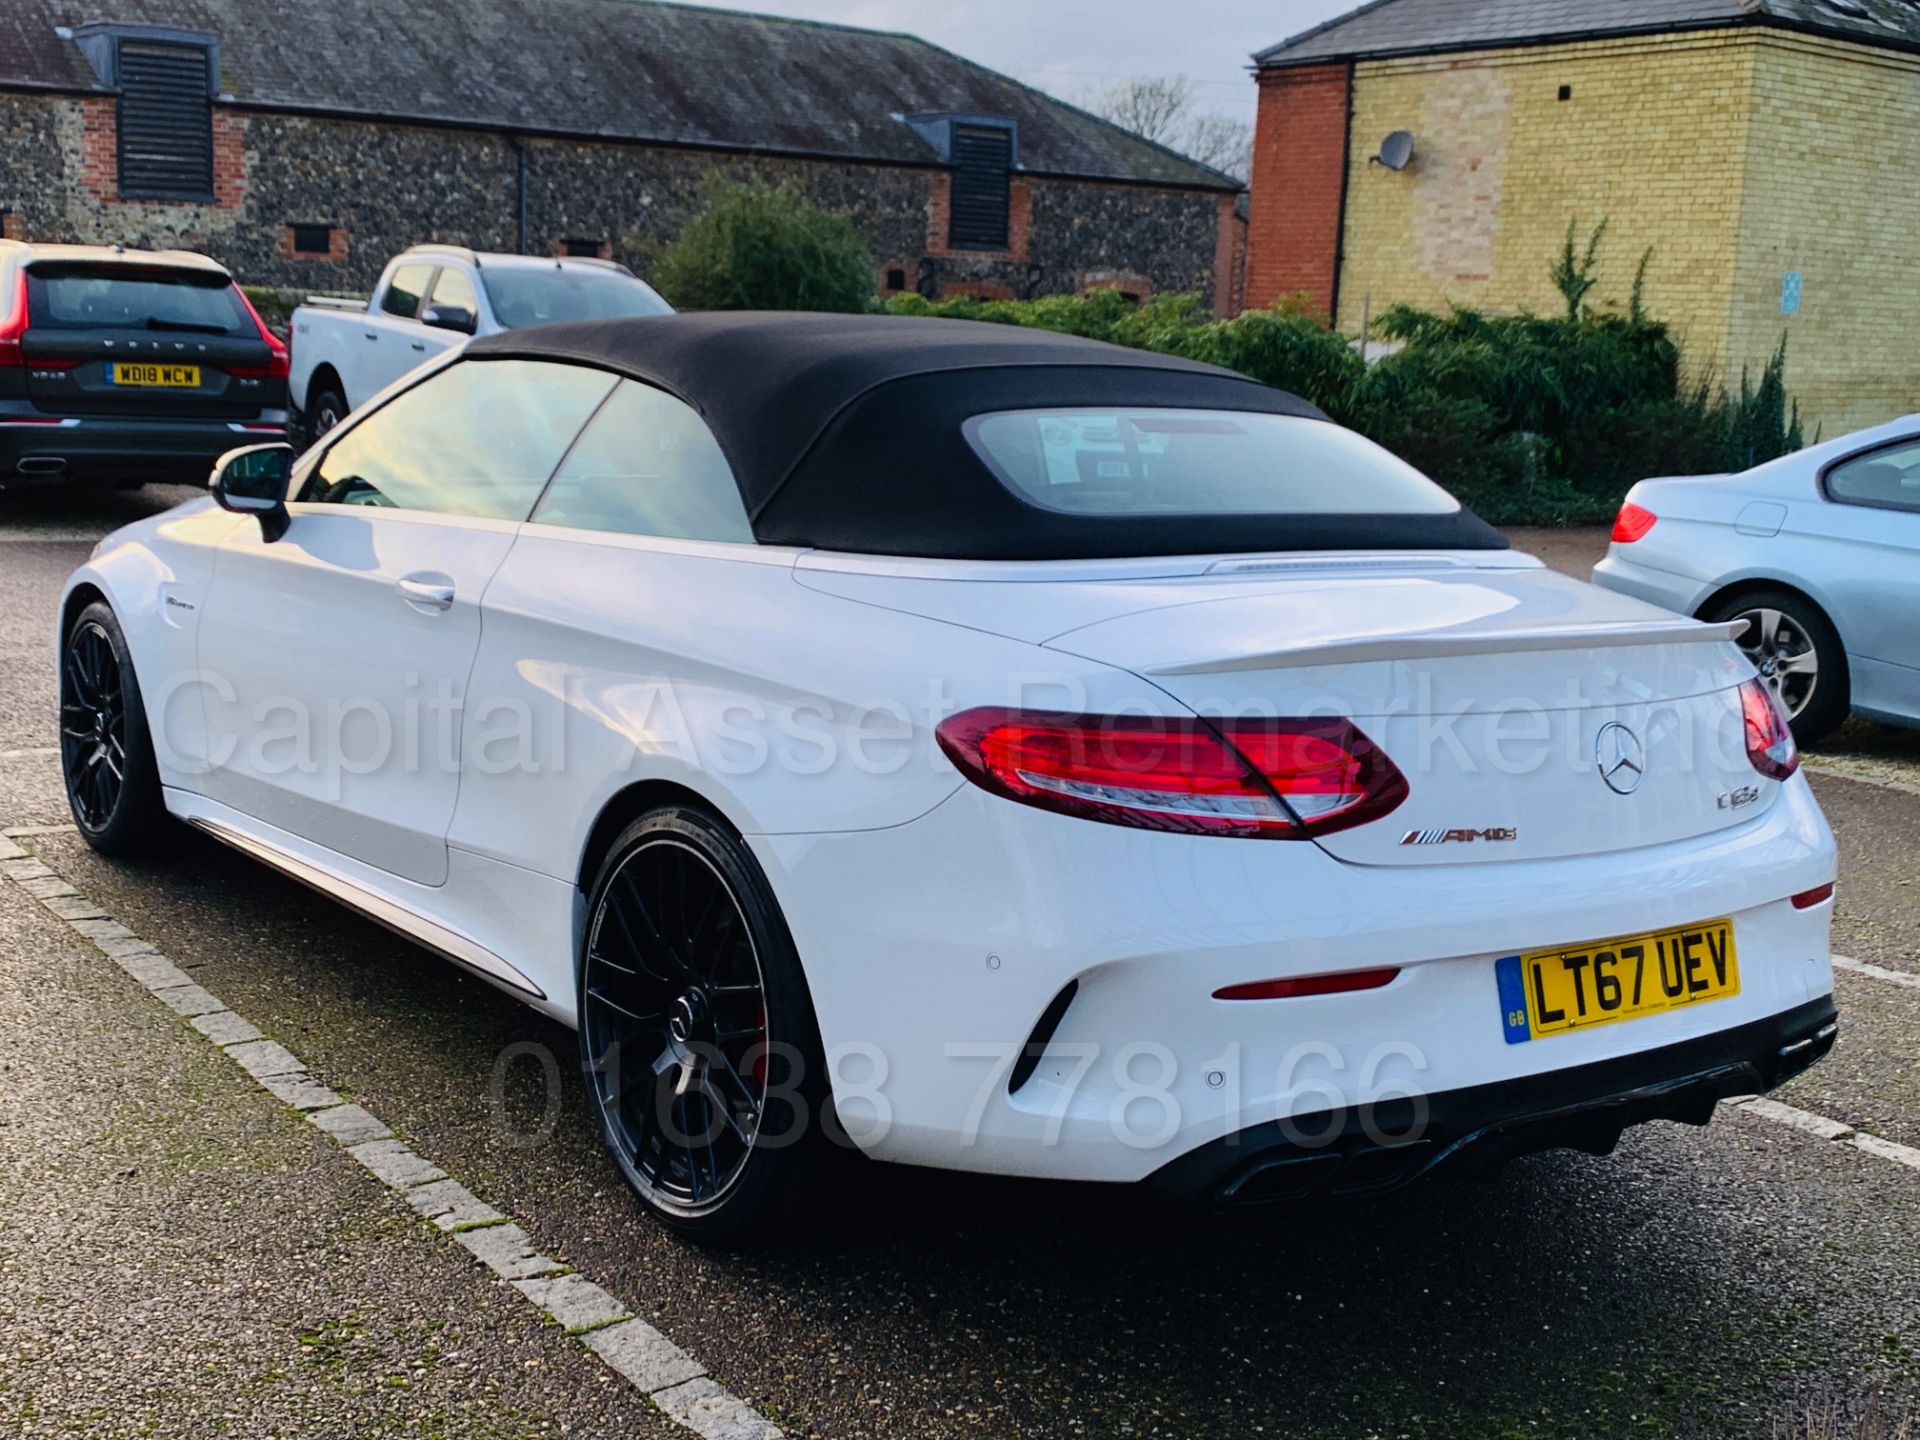 (On Sale) MERCEDES-BENZ AMG C63-S *CABRIOLET* (67 REG) '4.0 BI-TURBO -510 BHP - AUTO' *FULLY LOADED* - Image 18 of 79